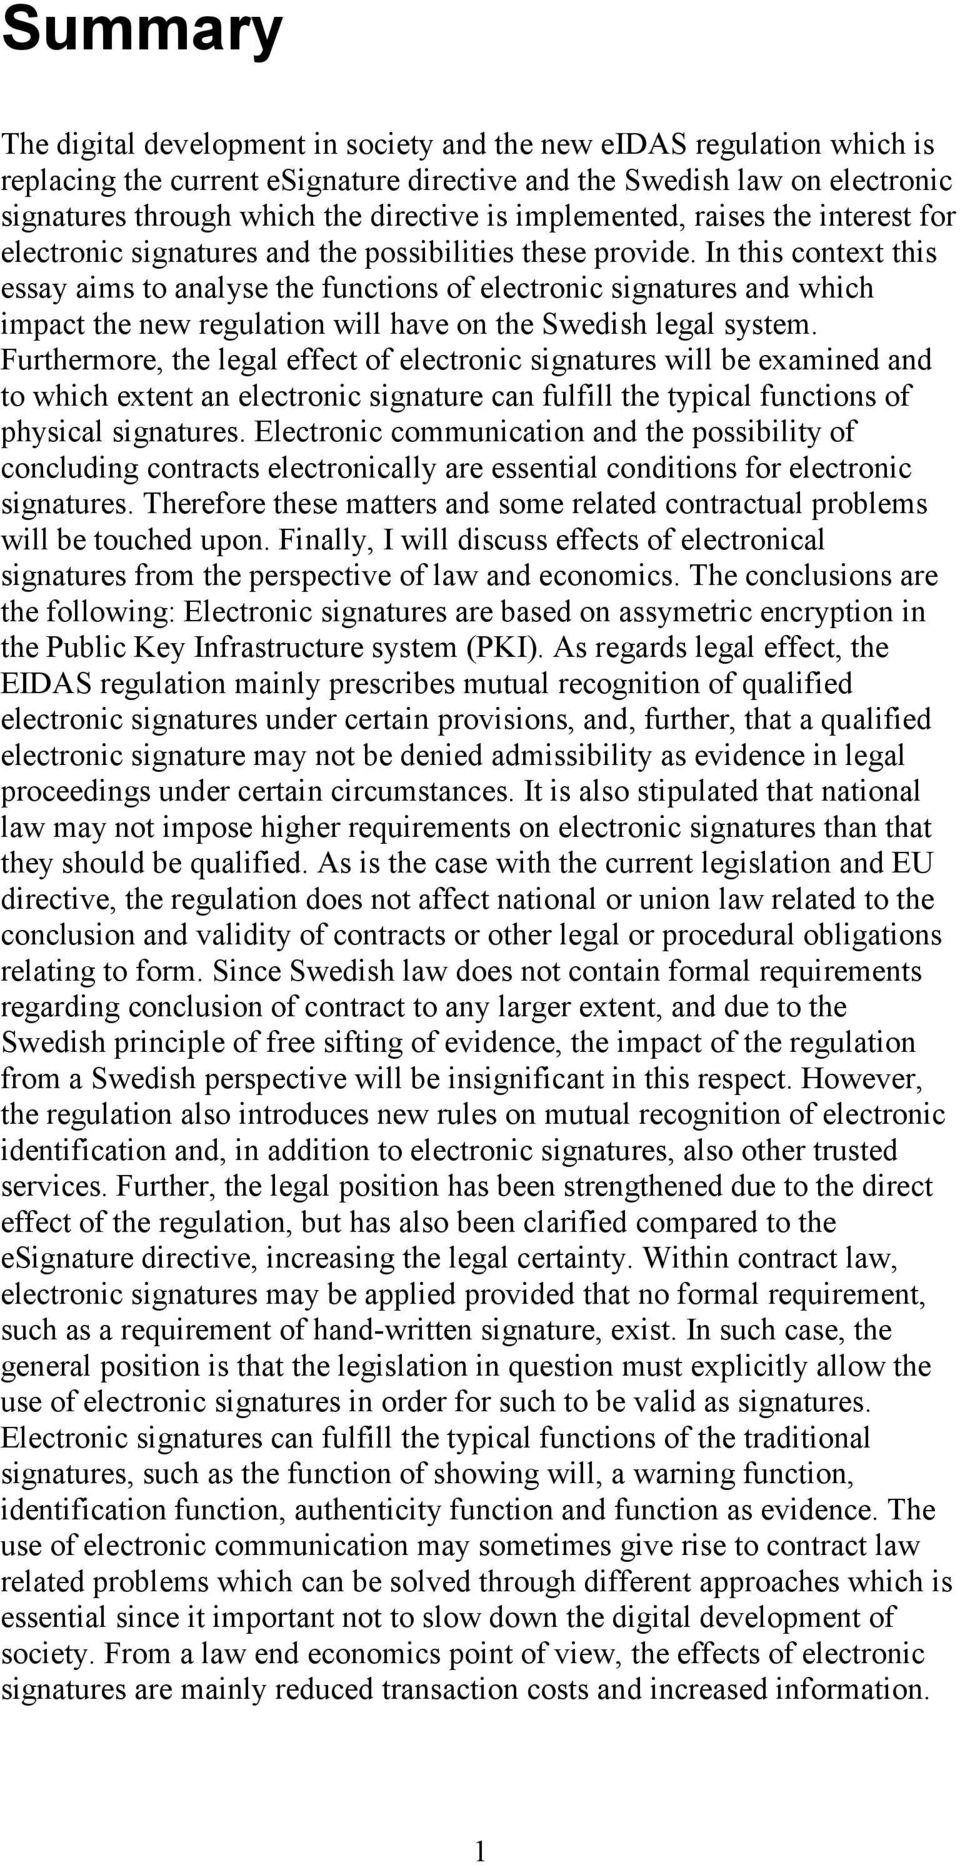 In this context this essay aims to analyse the functions of electronic signatures and which impact the new regulation will have on the Swedish legal system.